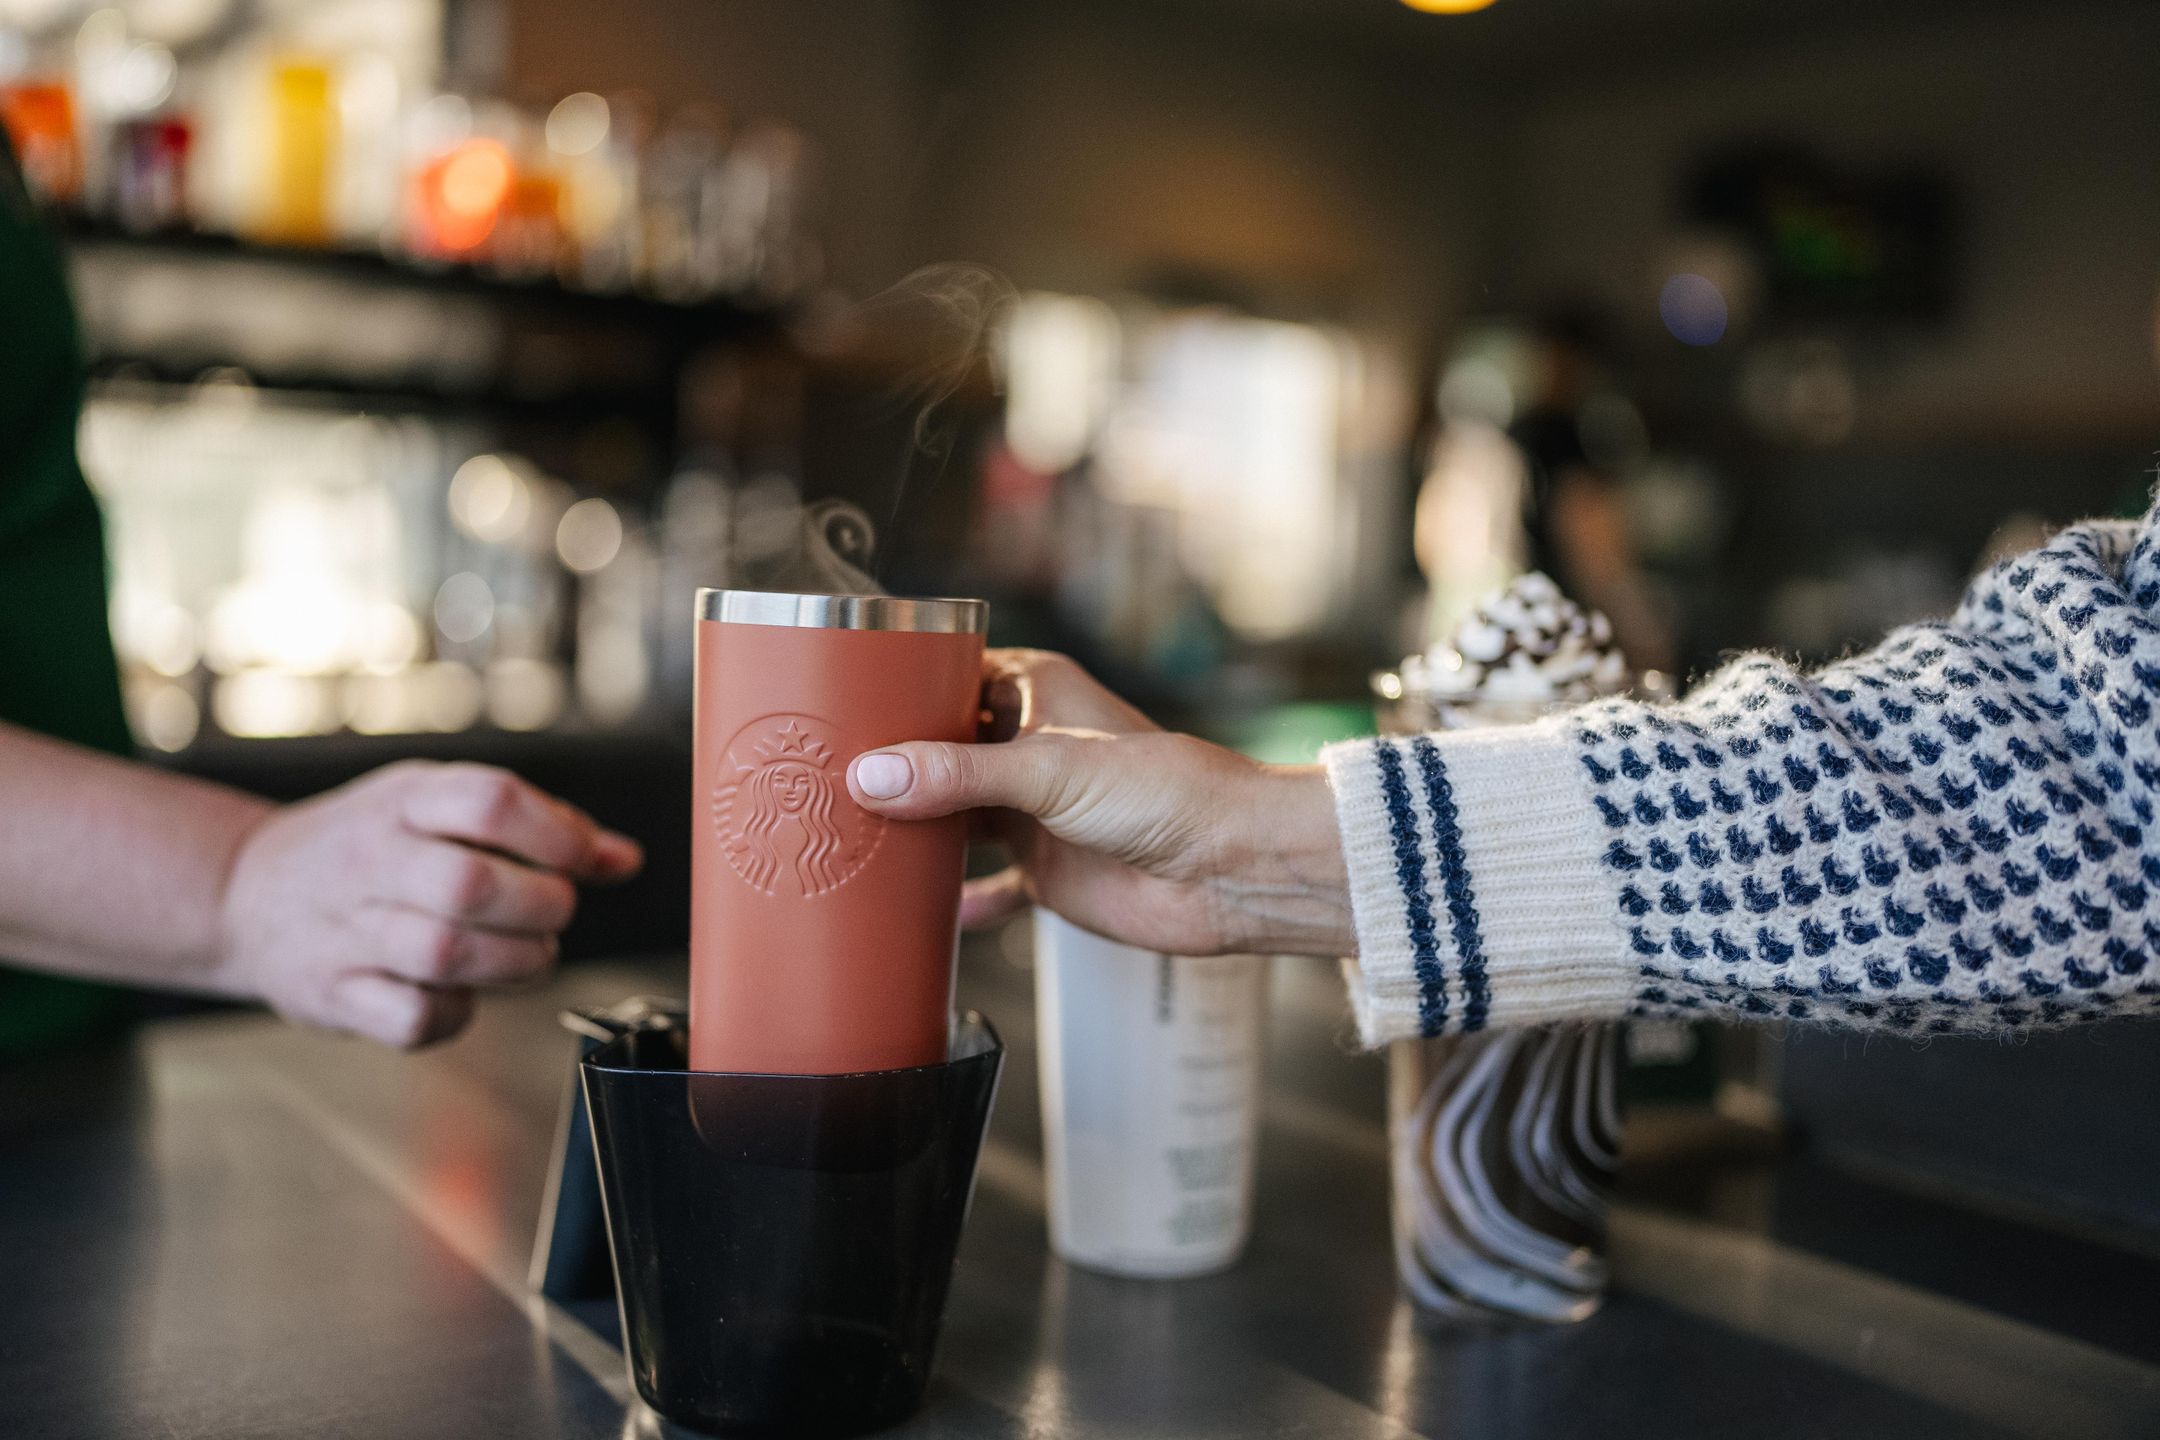 Starbucks Encourages Reusable Cups to Tackle Waste